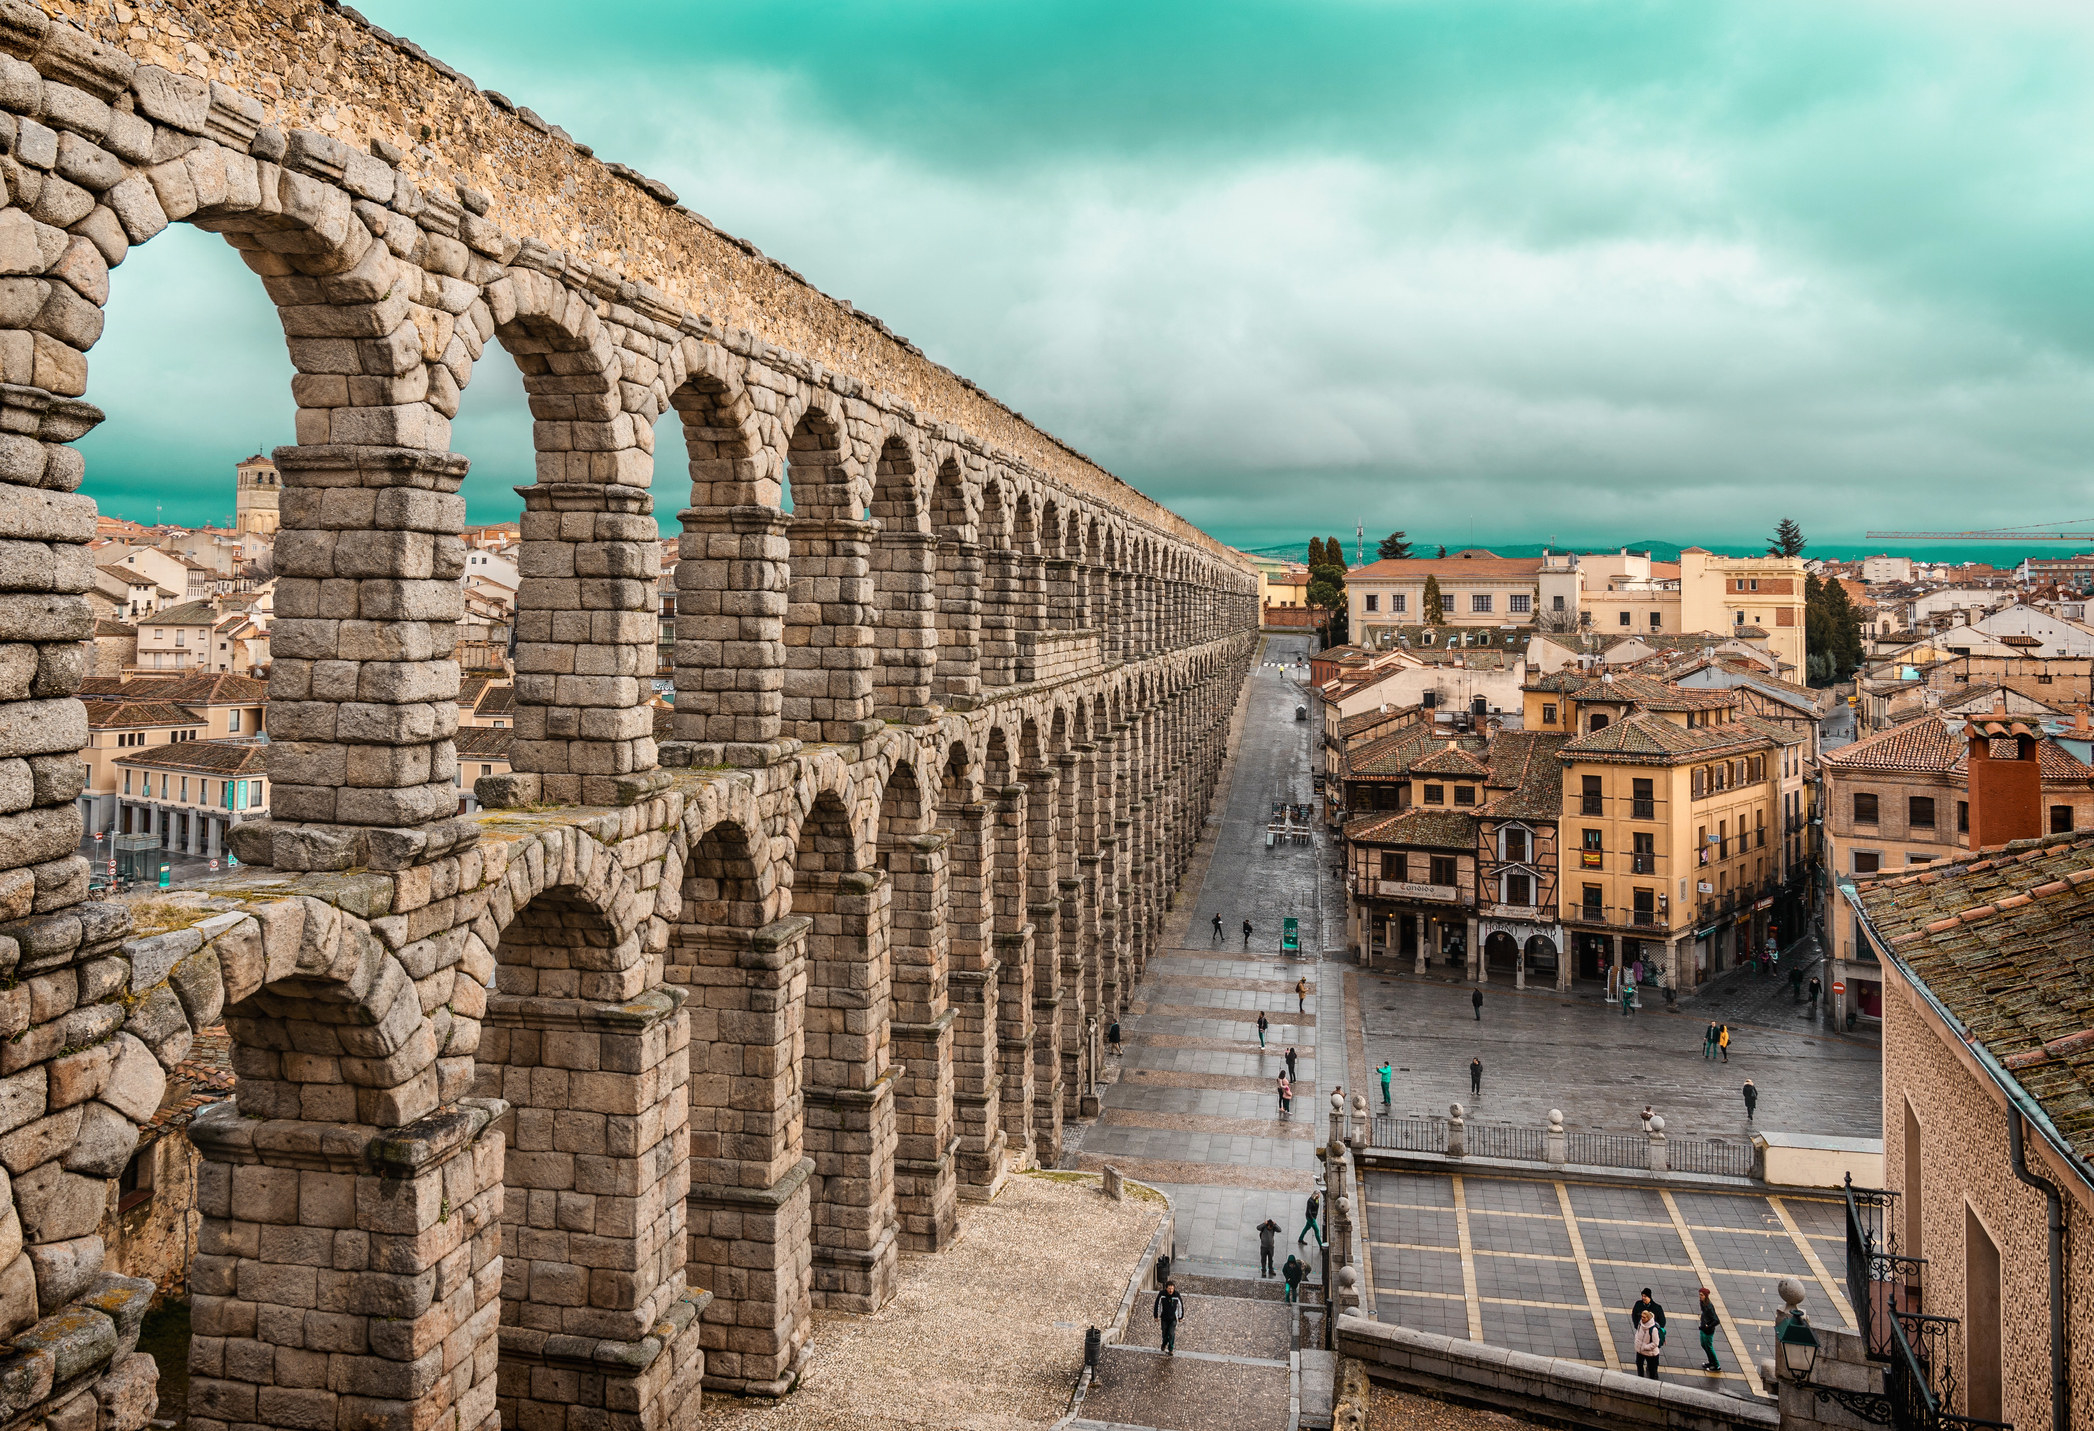 An old aqueduct and the city of Segovia, Spain.